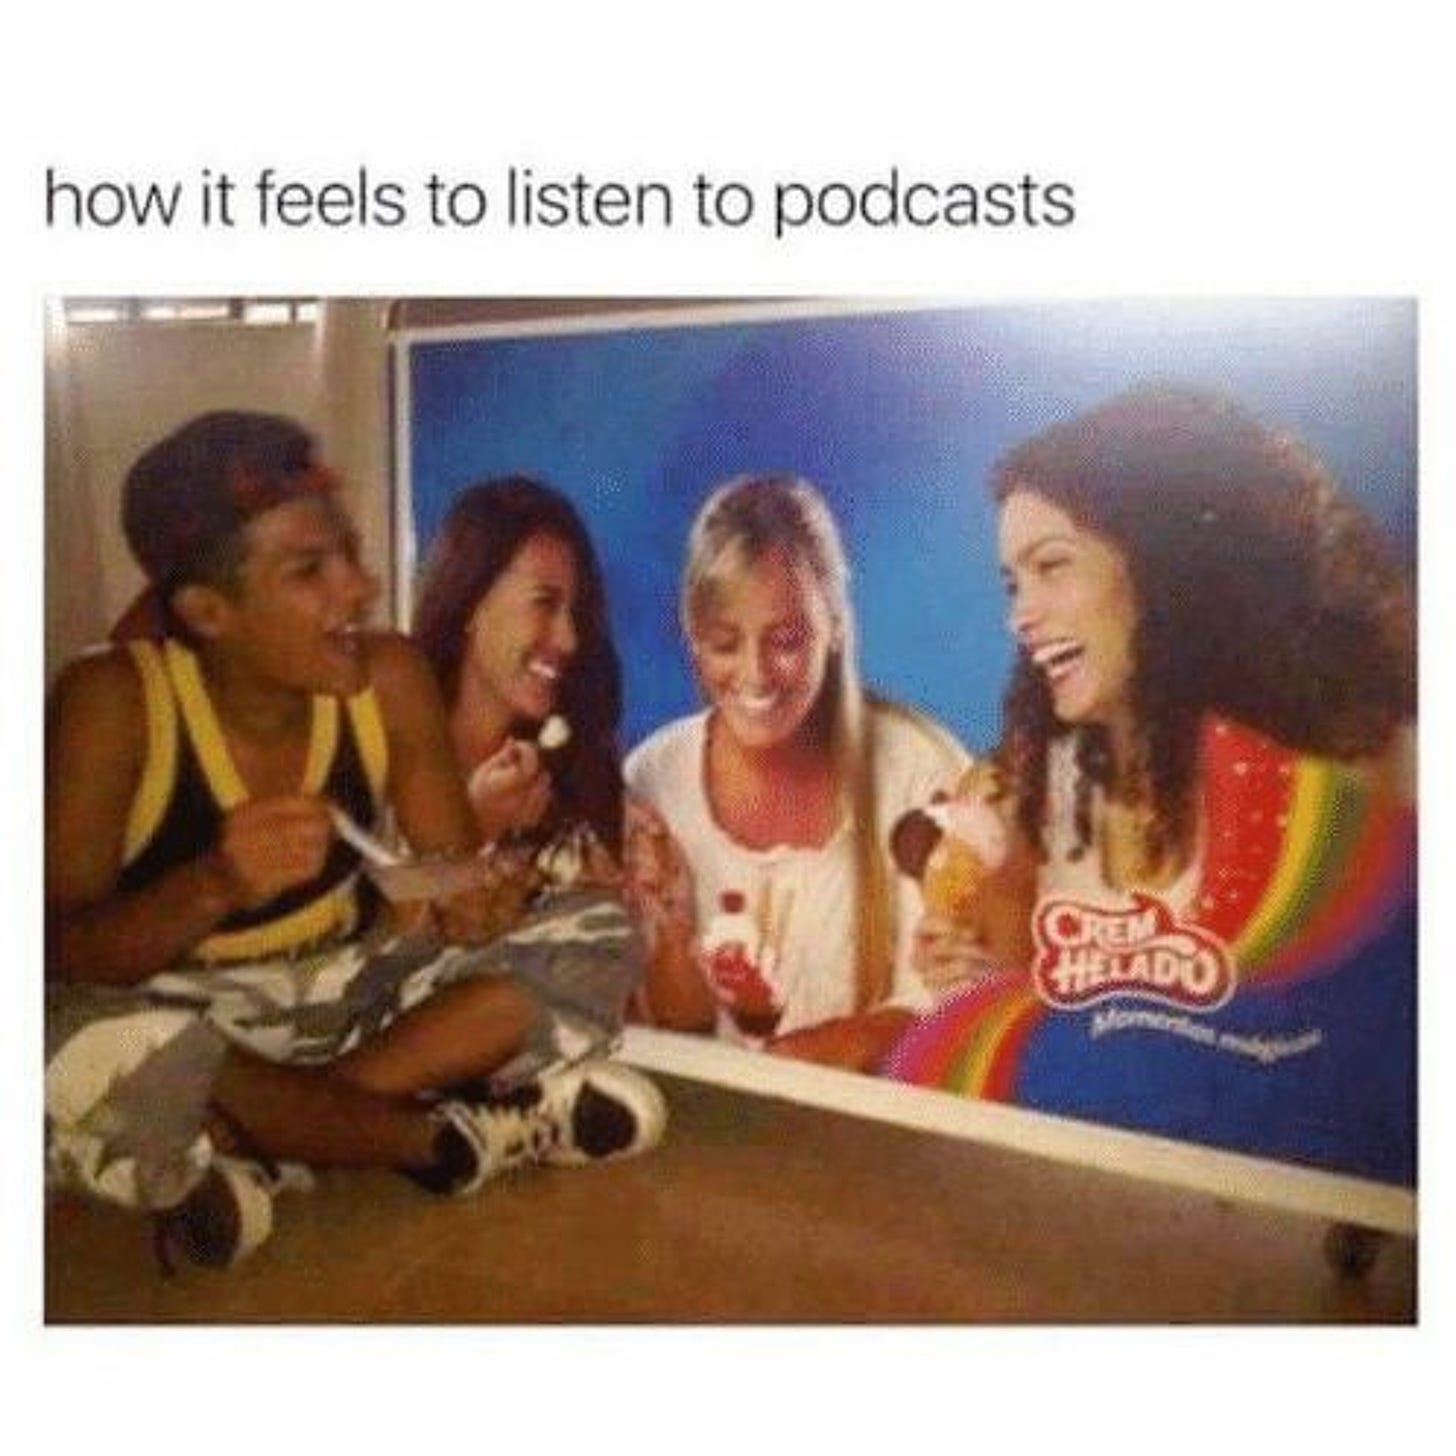 Friends with No Kids Podcast в Twitter: „Accurate😂 Tune in every  #wednesday for new #FriendswithNoKids episodes! #friendswithnokidspodcast  #fwnkpodcast #fwnk #childfree #teamnokids #nokids #childfreelife  #childfreebychoice #funny #lol #haha #meme ...